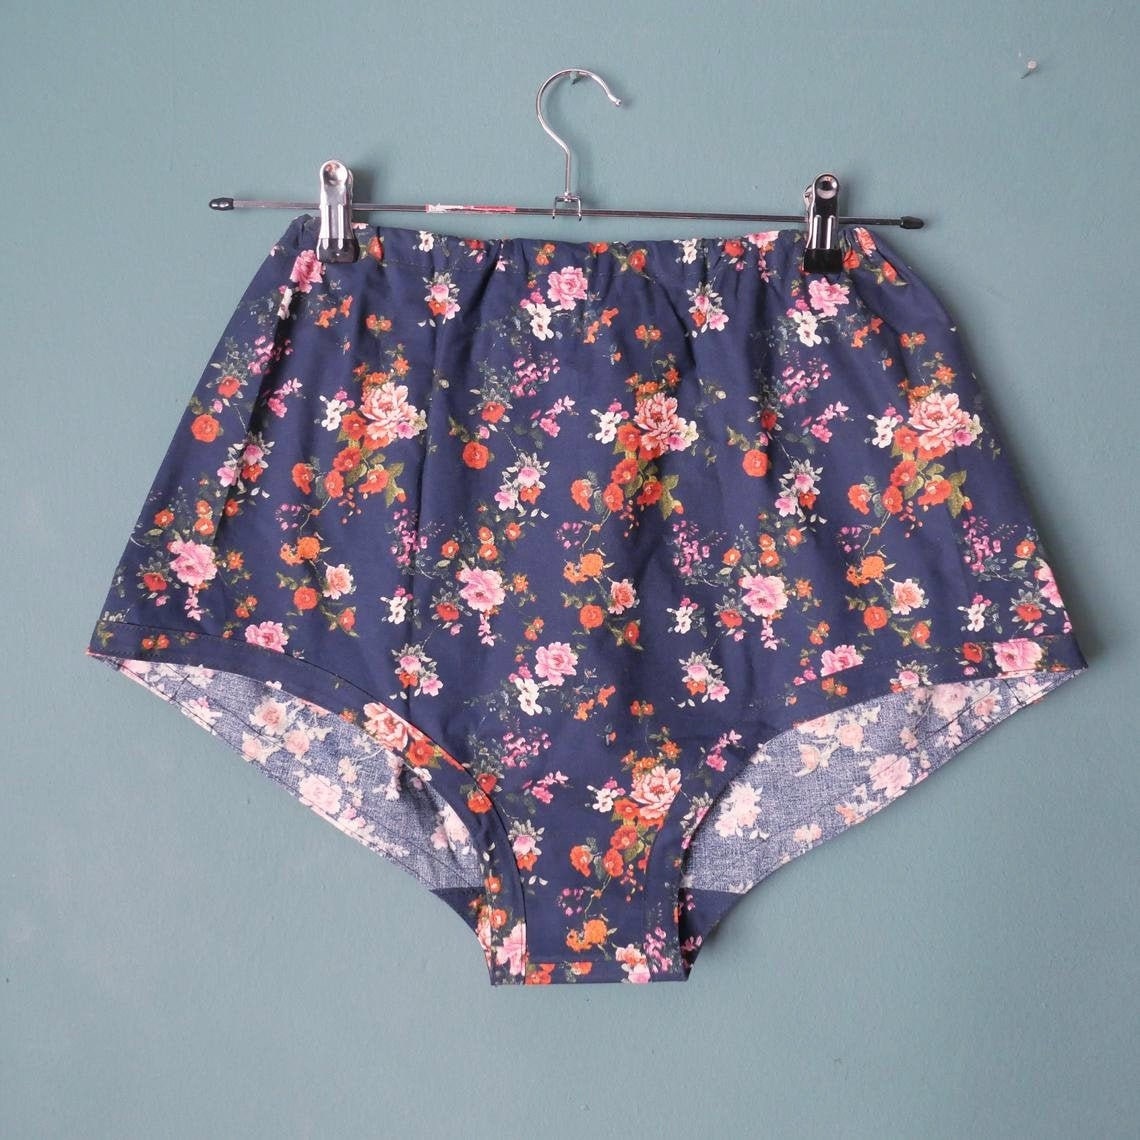 linqin Sweatproof Womens Hipster Underwear Delicate Floral Soft